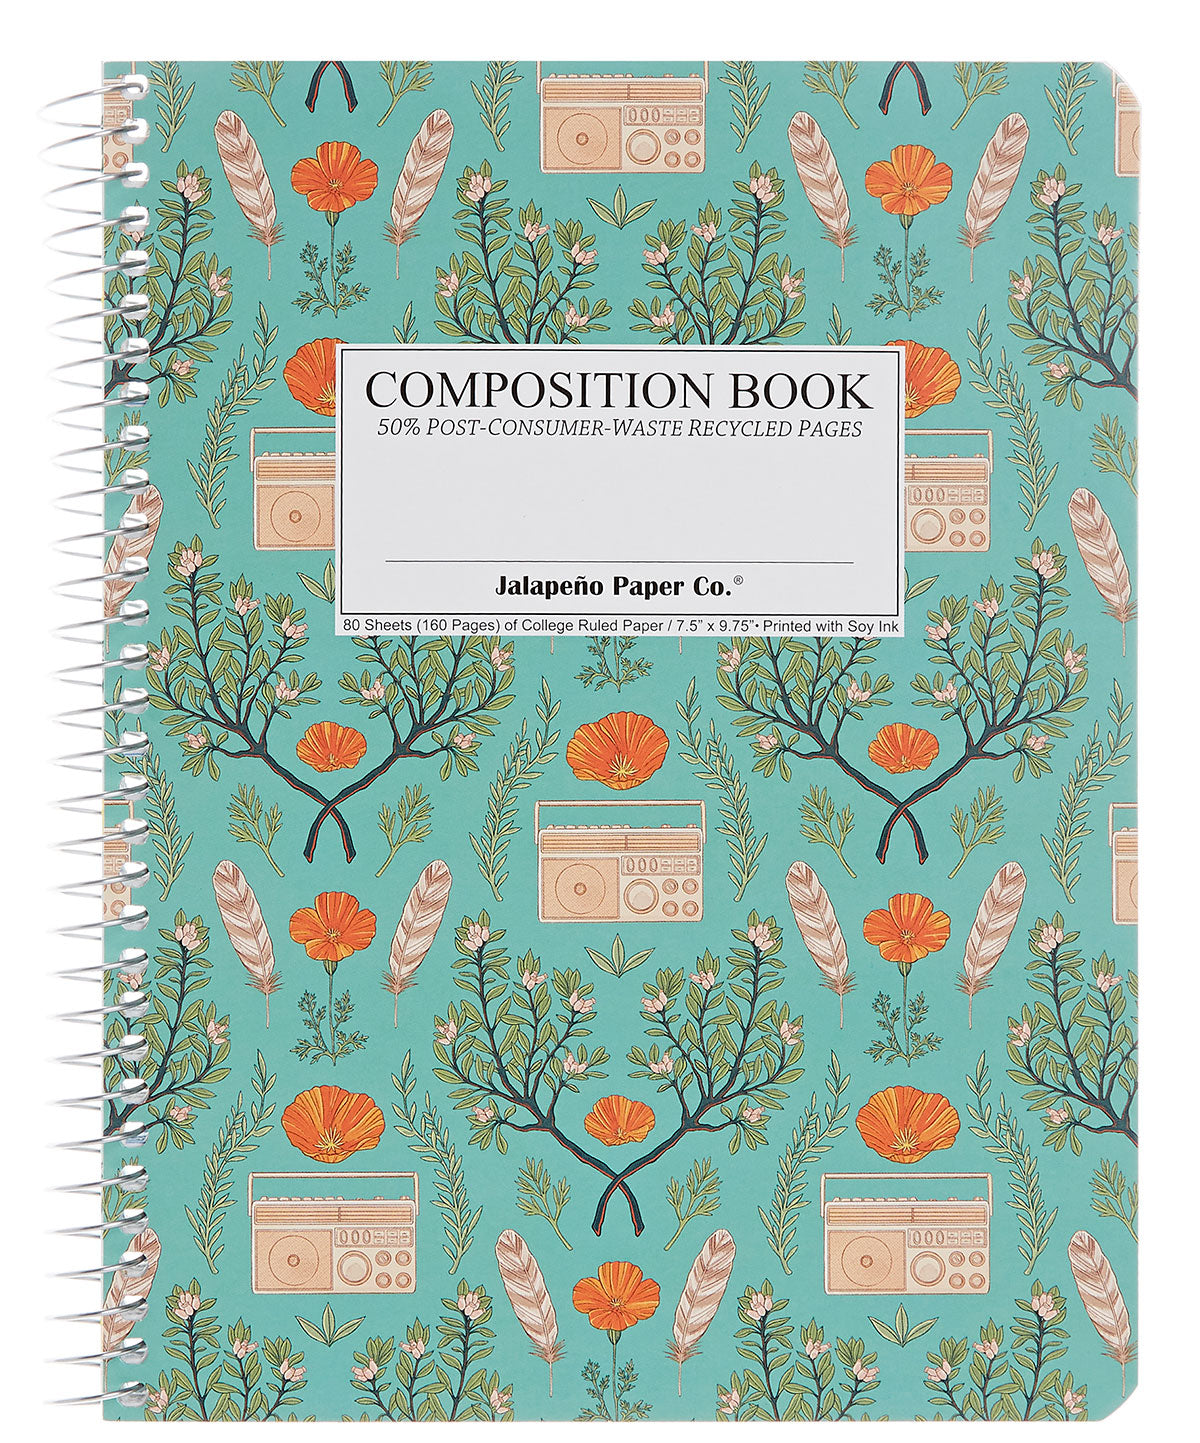 Spiral notebook printed with a pattern of portable radios and orange flowers